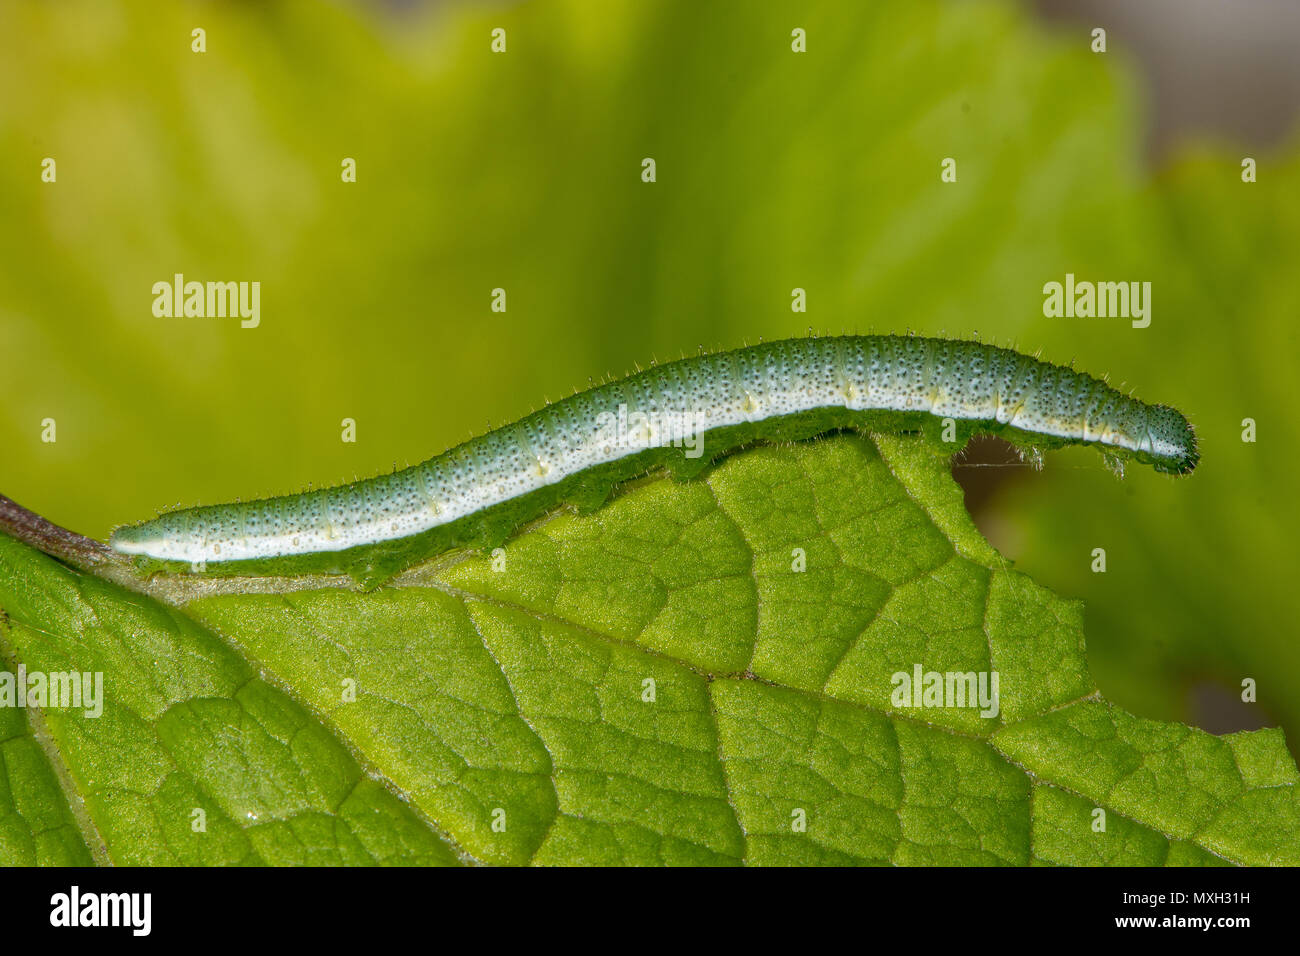 Orange-tip butterfly (Anthocharis cardamines) caterpillar. Camouflaged larva of insect in the family Pieridae feeding on garlic mustard Stock Photo